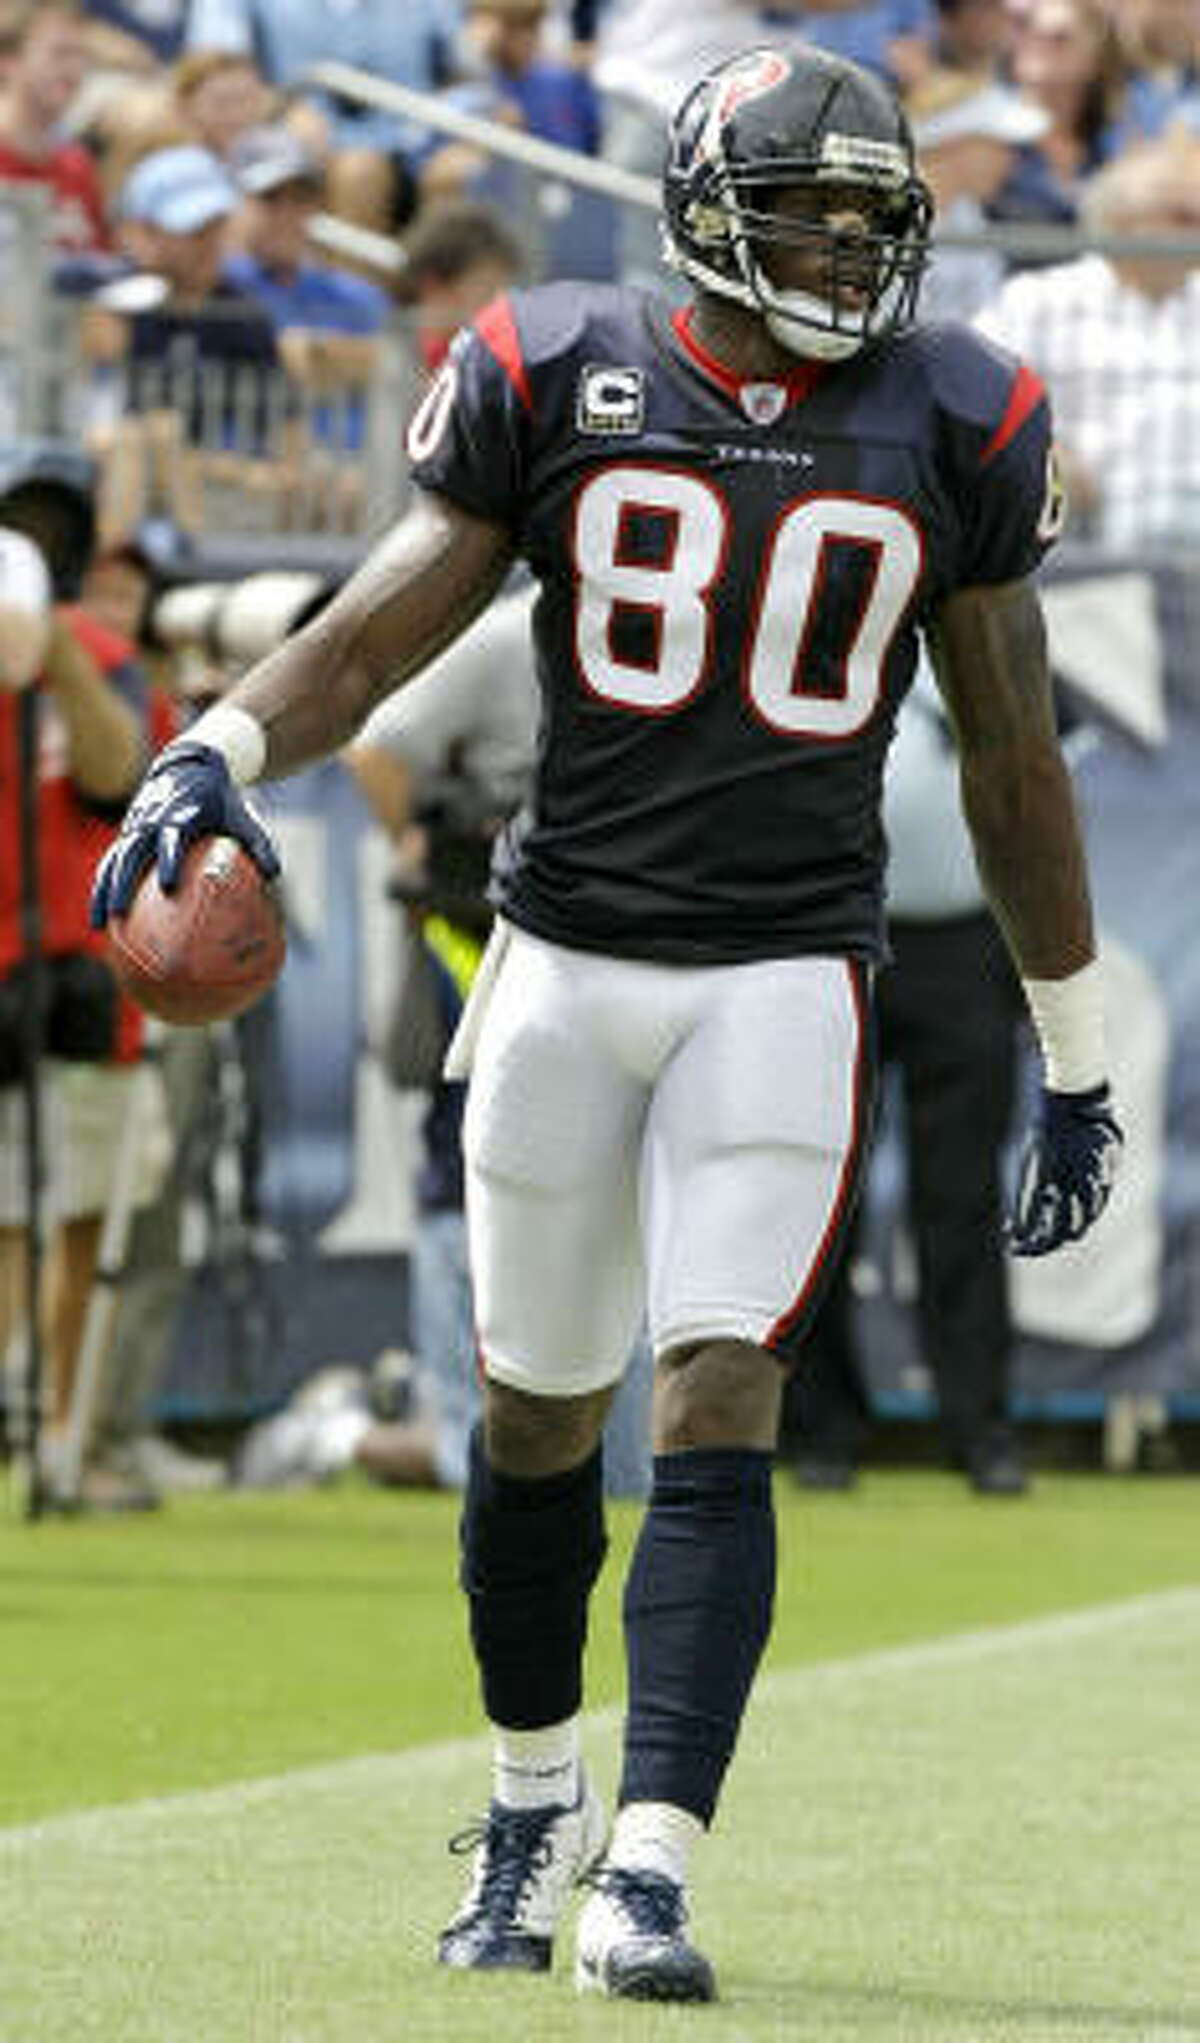 Houston Texans wide receiver Andre Johnson (80) walks through the end zone after scoring a touchdown against the Tennessee Titans during the first quarter of an NFL football game at LP Field Sunday, Sept. 20, 2009, in Nashville. ( Brett Coomer / Chronicle )